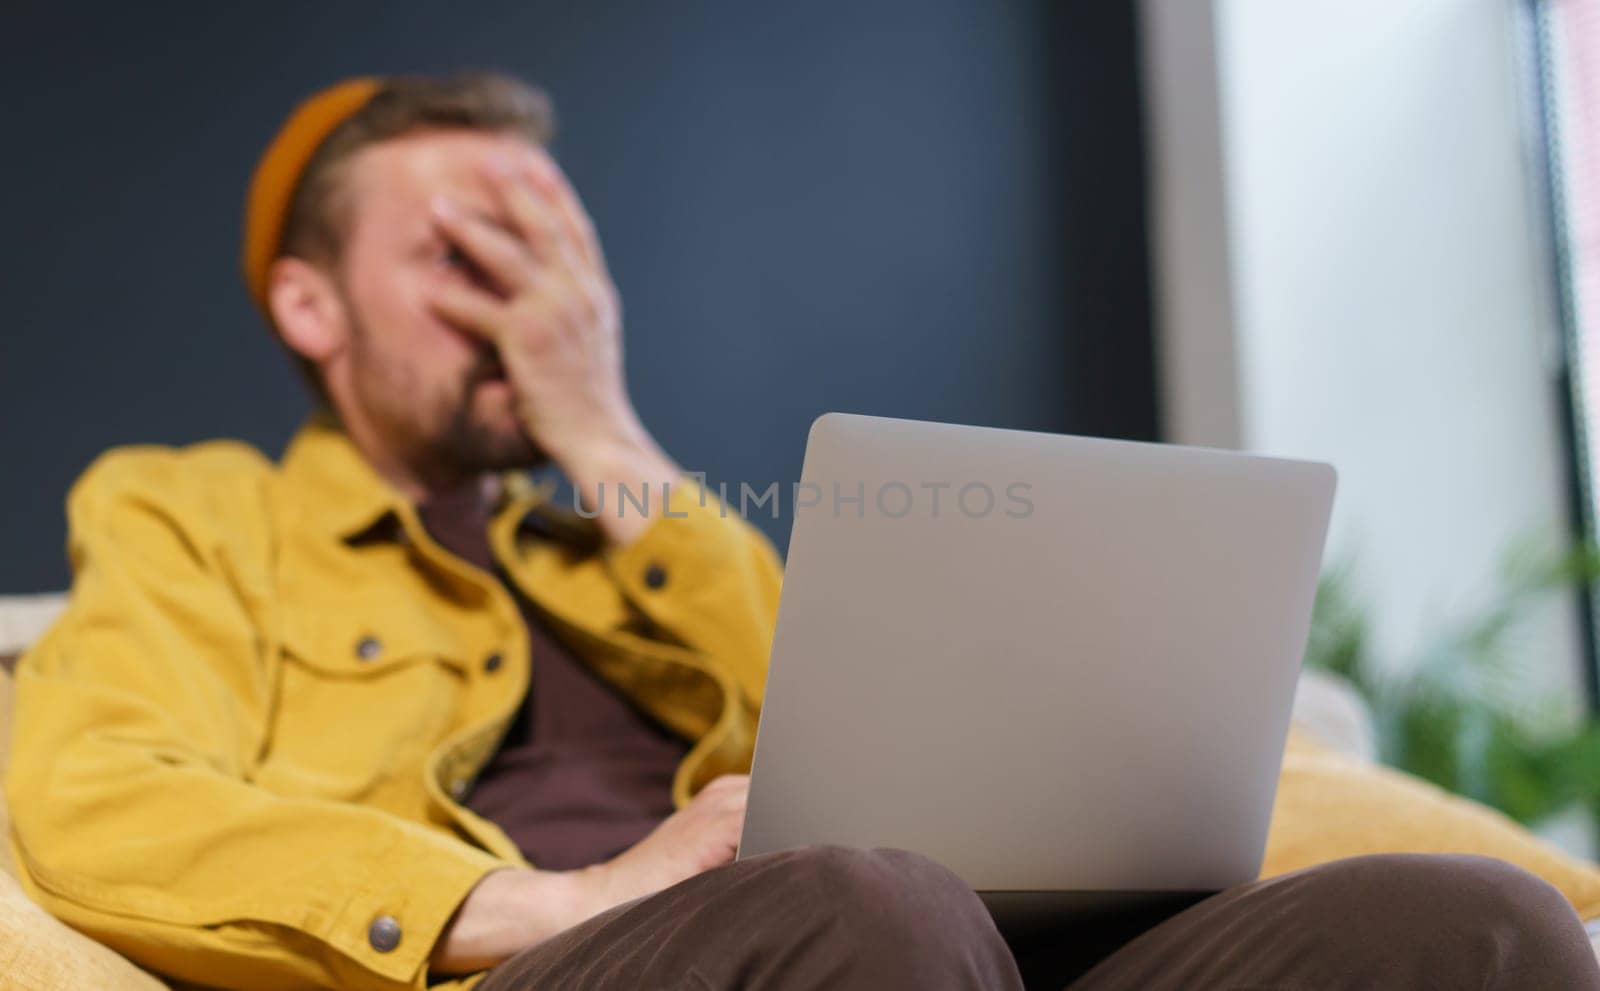 Man sitting on sofa with laptop, showing facepalm gesture with hand on face. Focus is on laptop, which suggests that the man may be experiencing frustration or disappointment related to the technology by LipikStockMedia